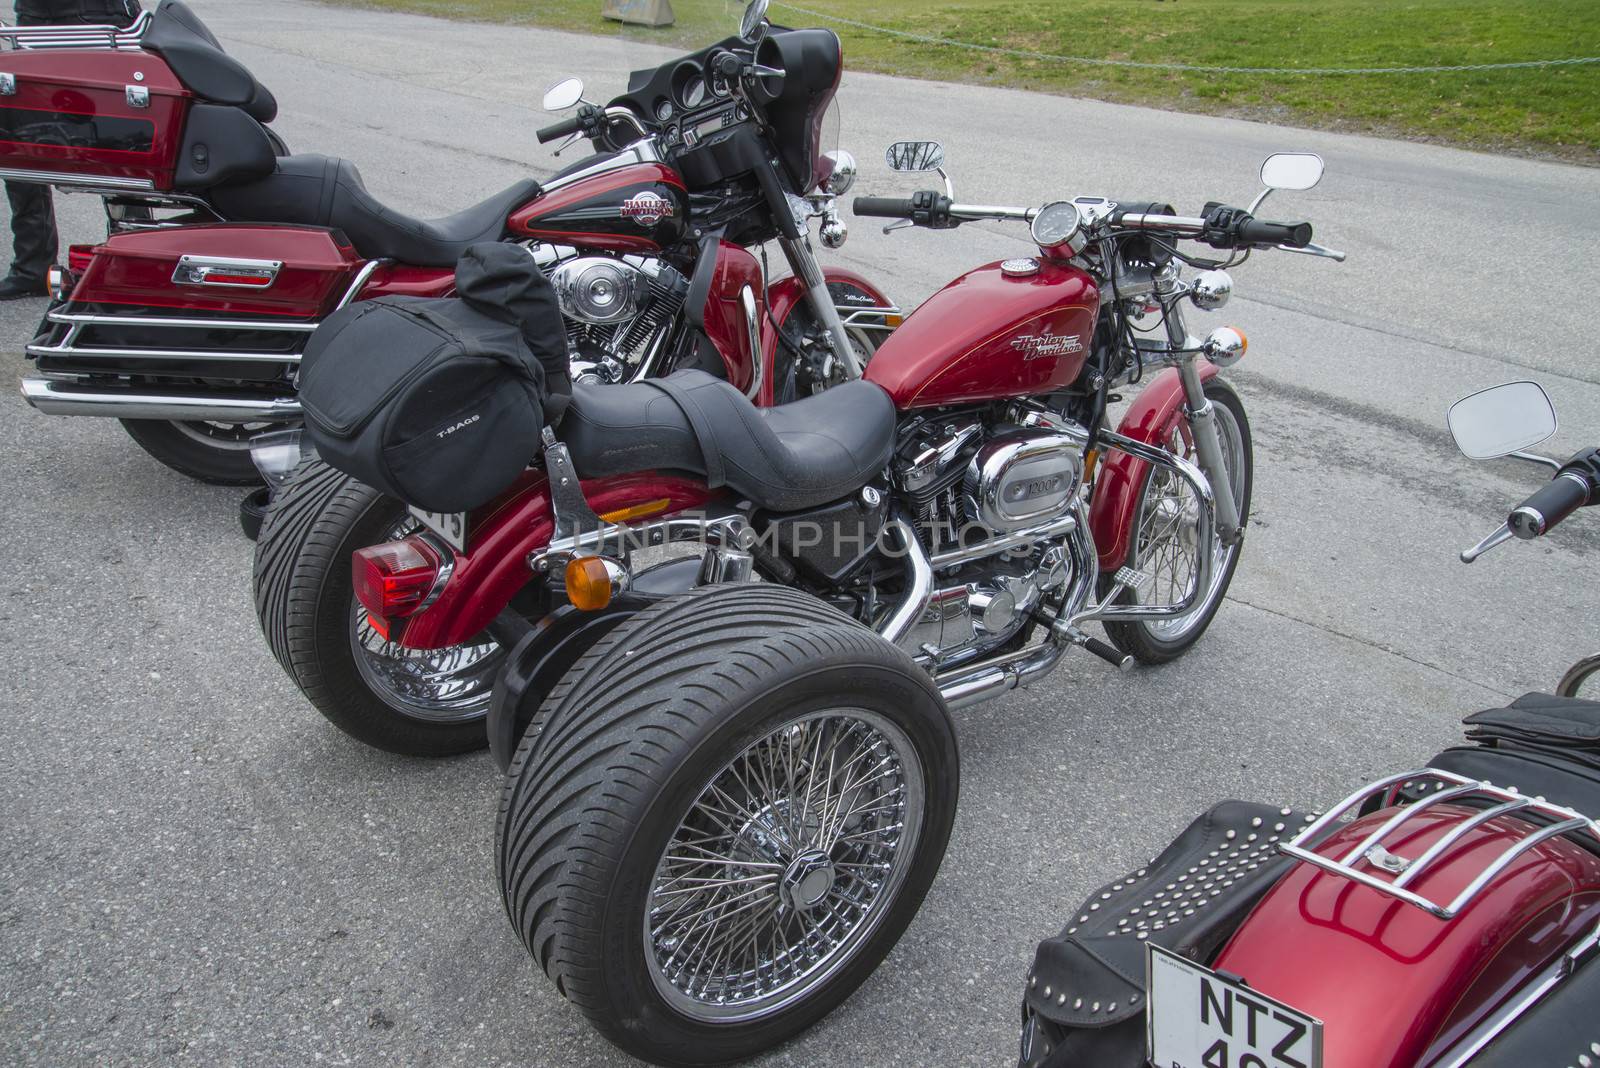 Every year in May there is a motorcycle meeting at Fredriksten fortress in Halden, Norway. In this photo Harley Davidson 3 wheels. 